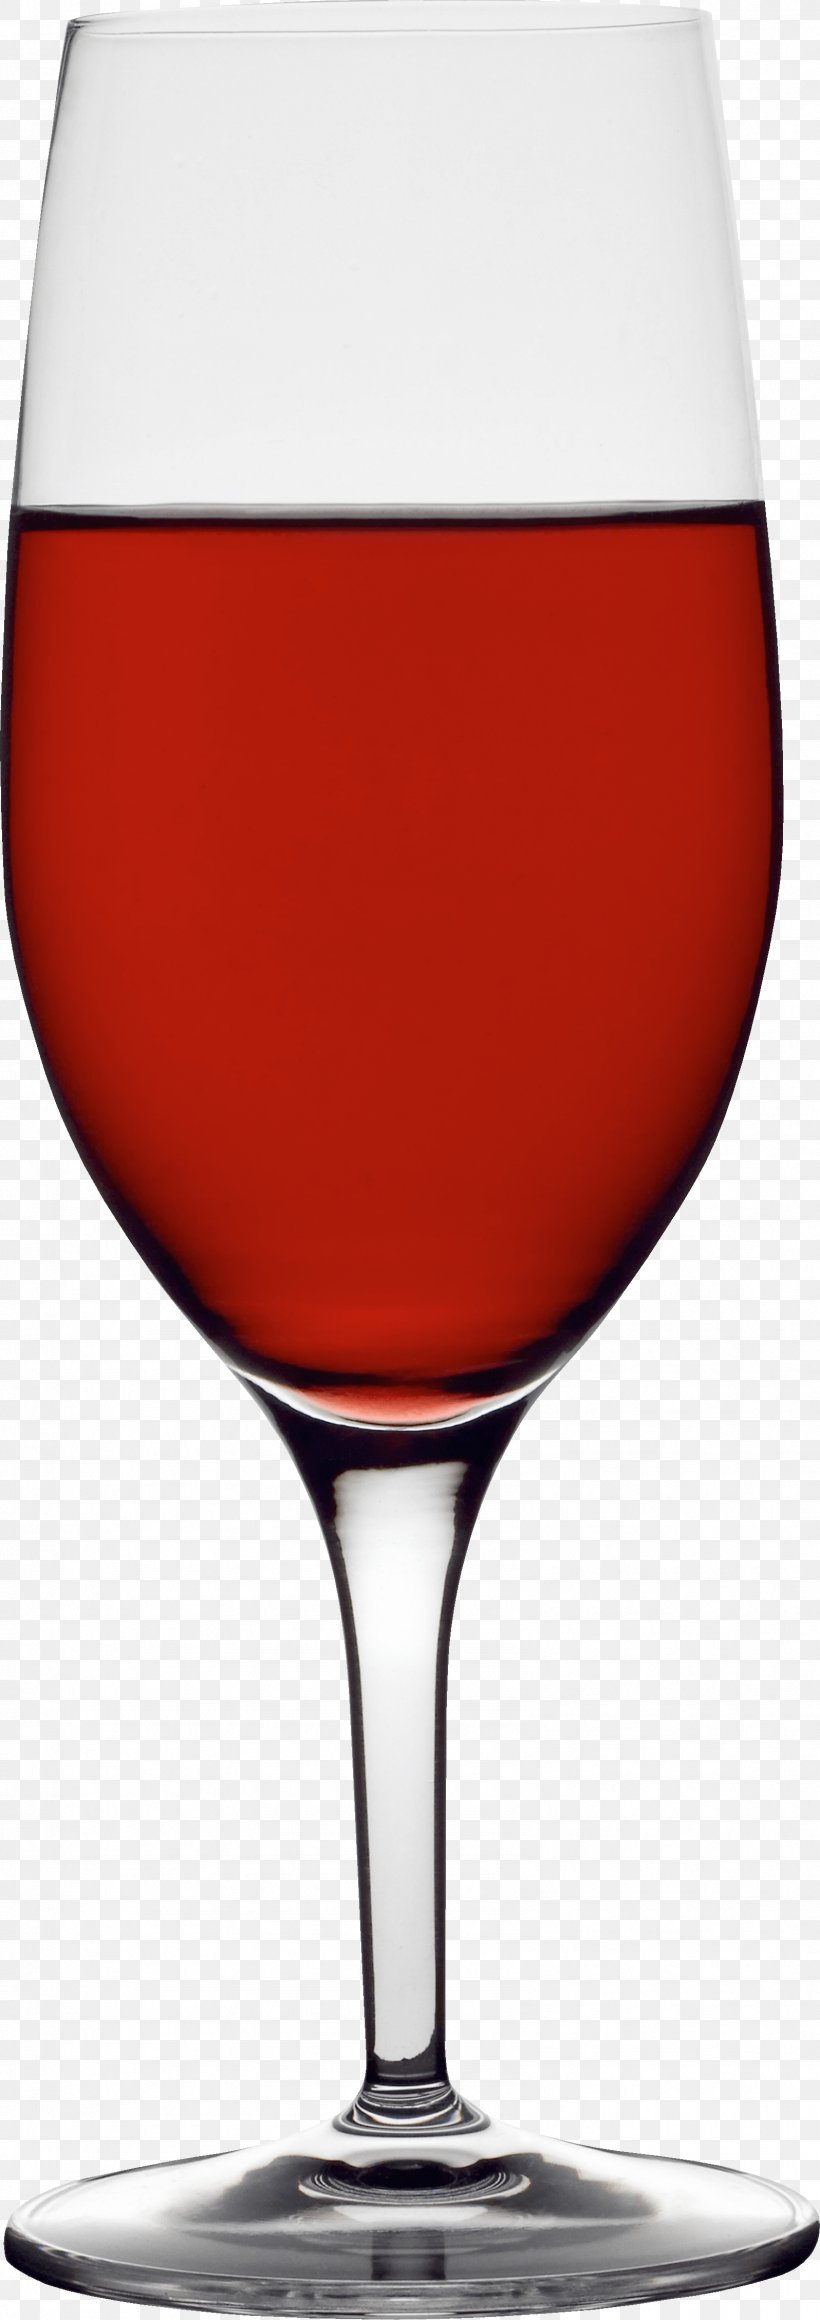 Wine Glass Champagne Image, PNG, 1596x4516px, Wine, Beer Glass, Beer Glasses, Champagne, Champagne Stemware Download Free